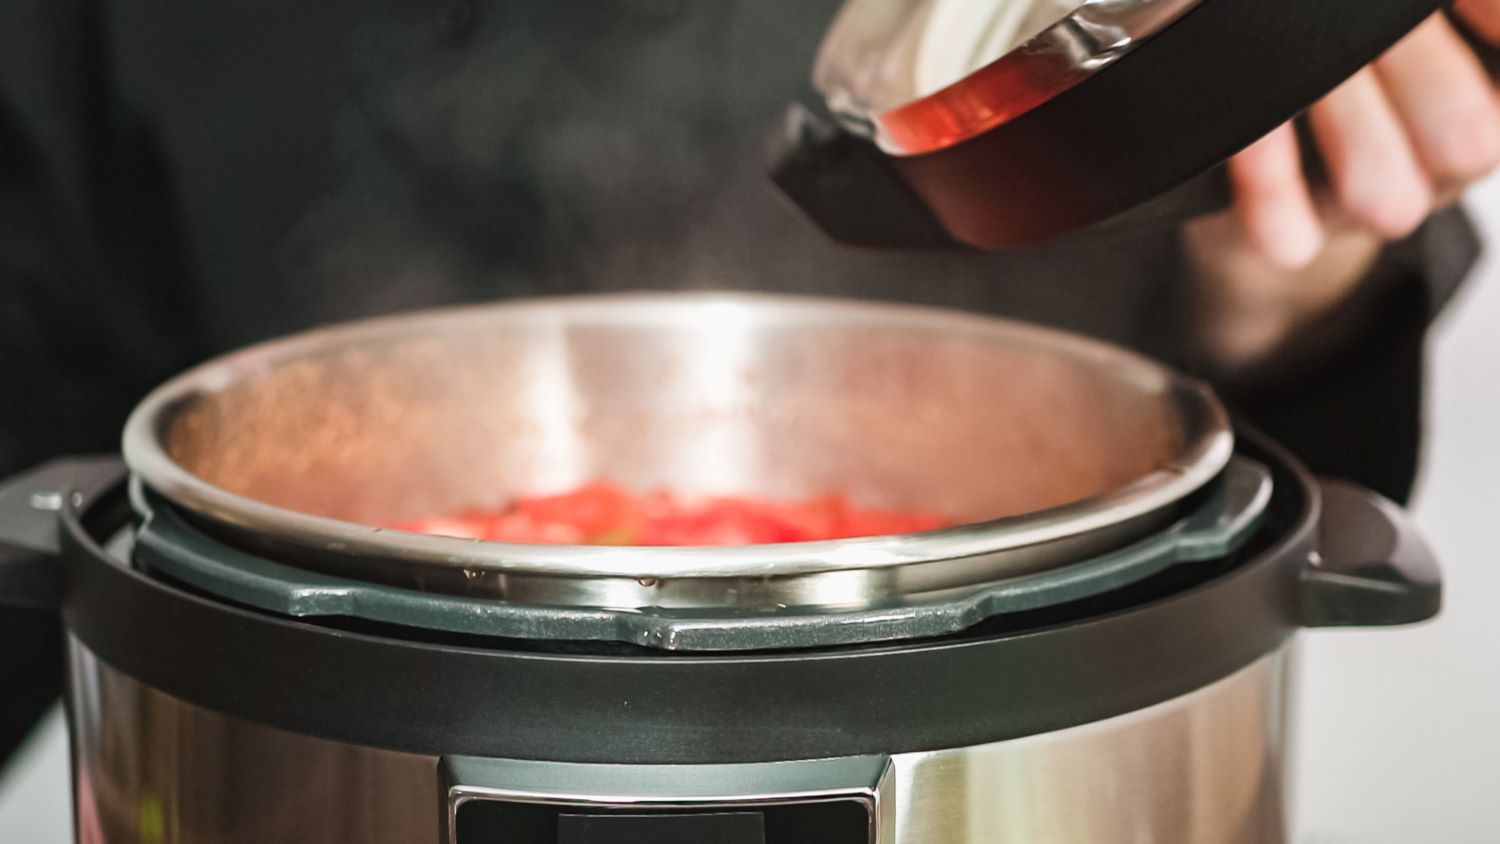 How To Use An Electric Pressure Cooker As A Slow Cooker